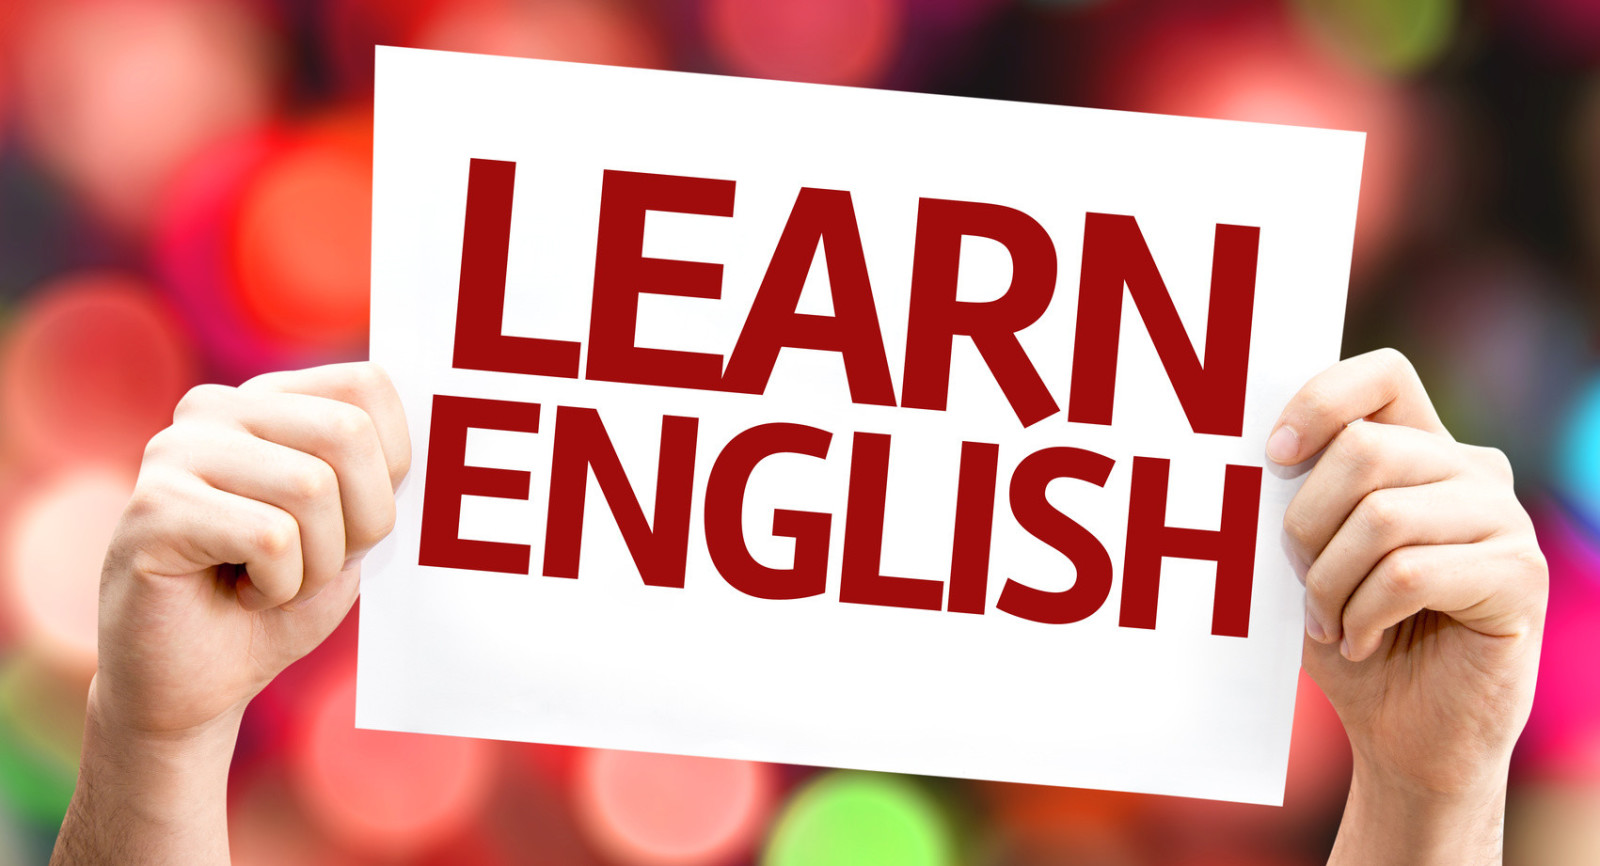 If I want to learn English, what to do?